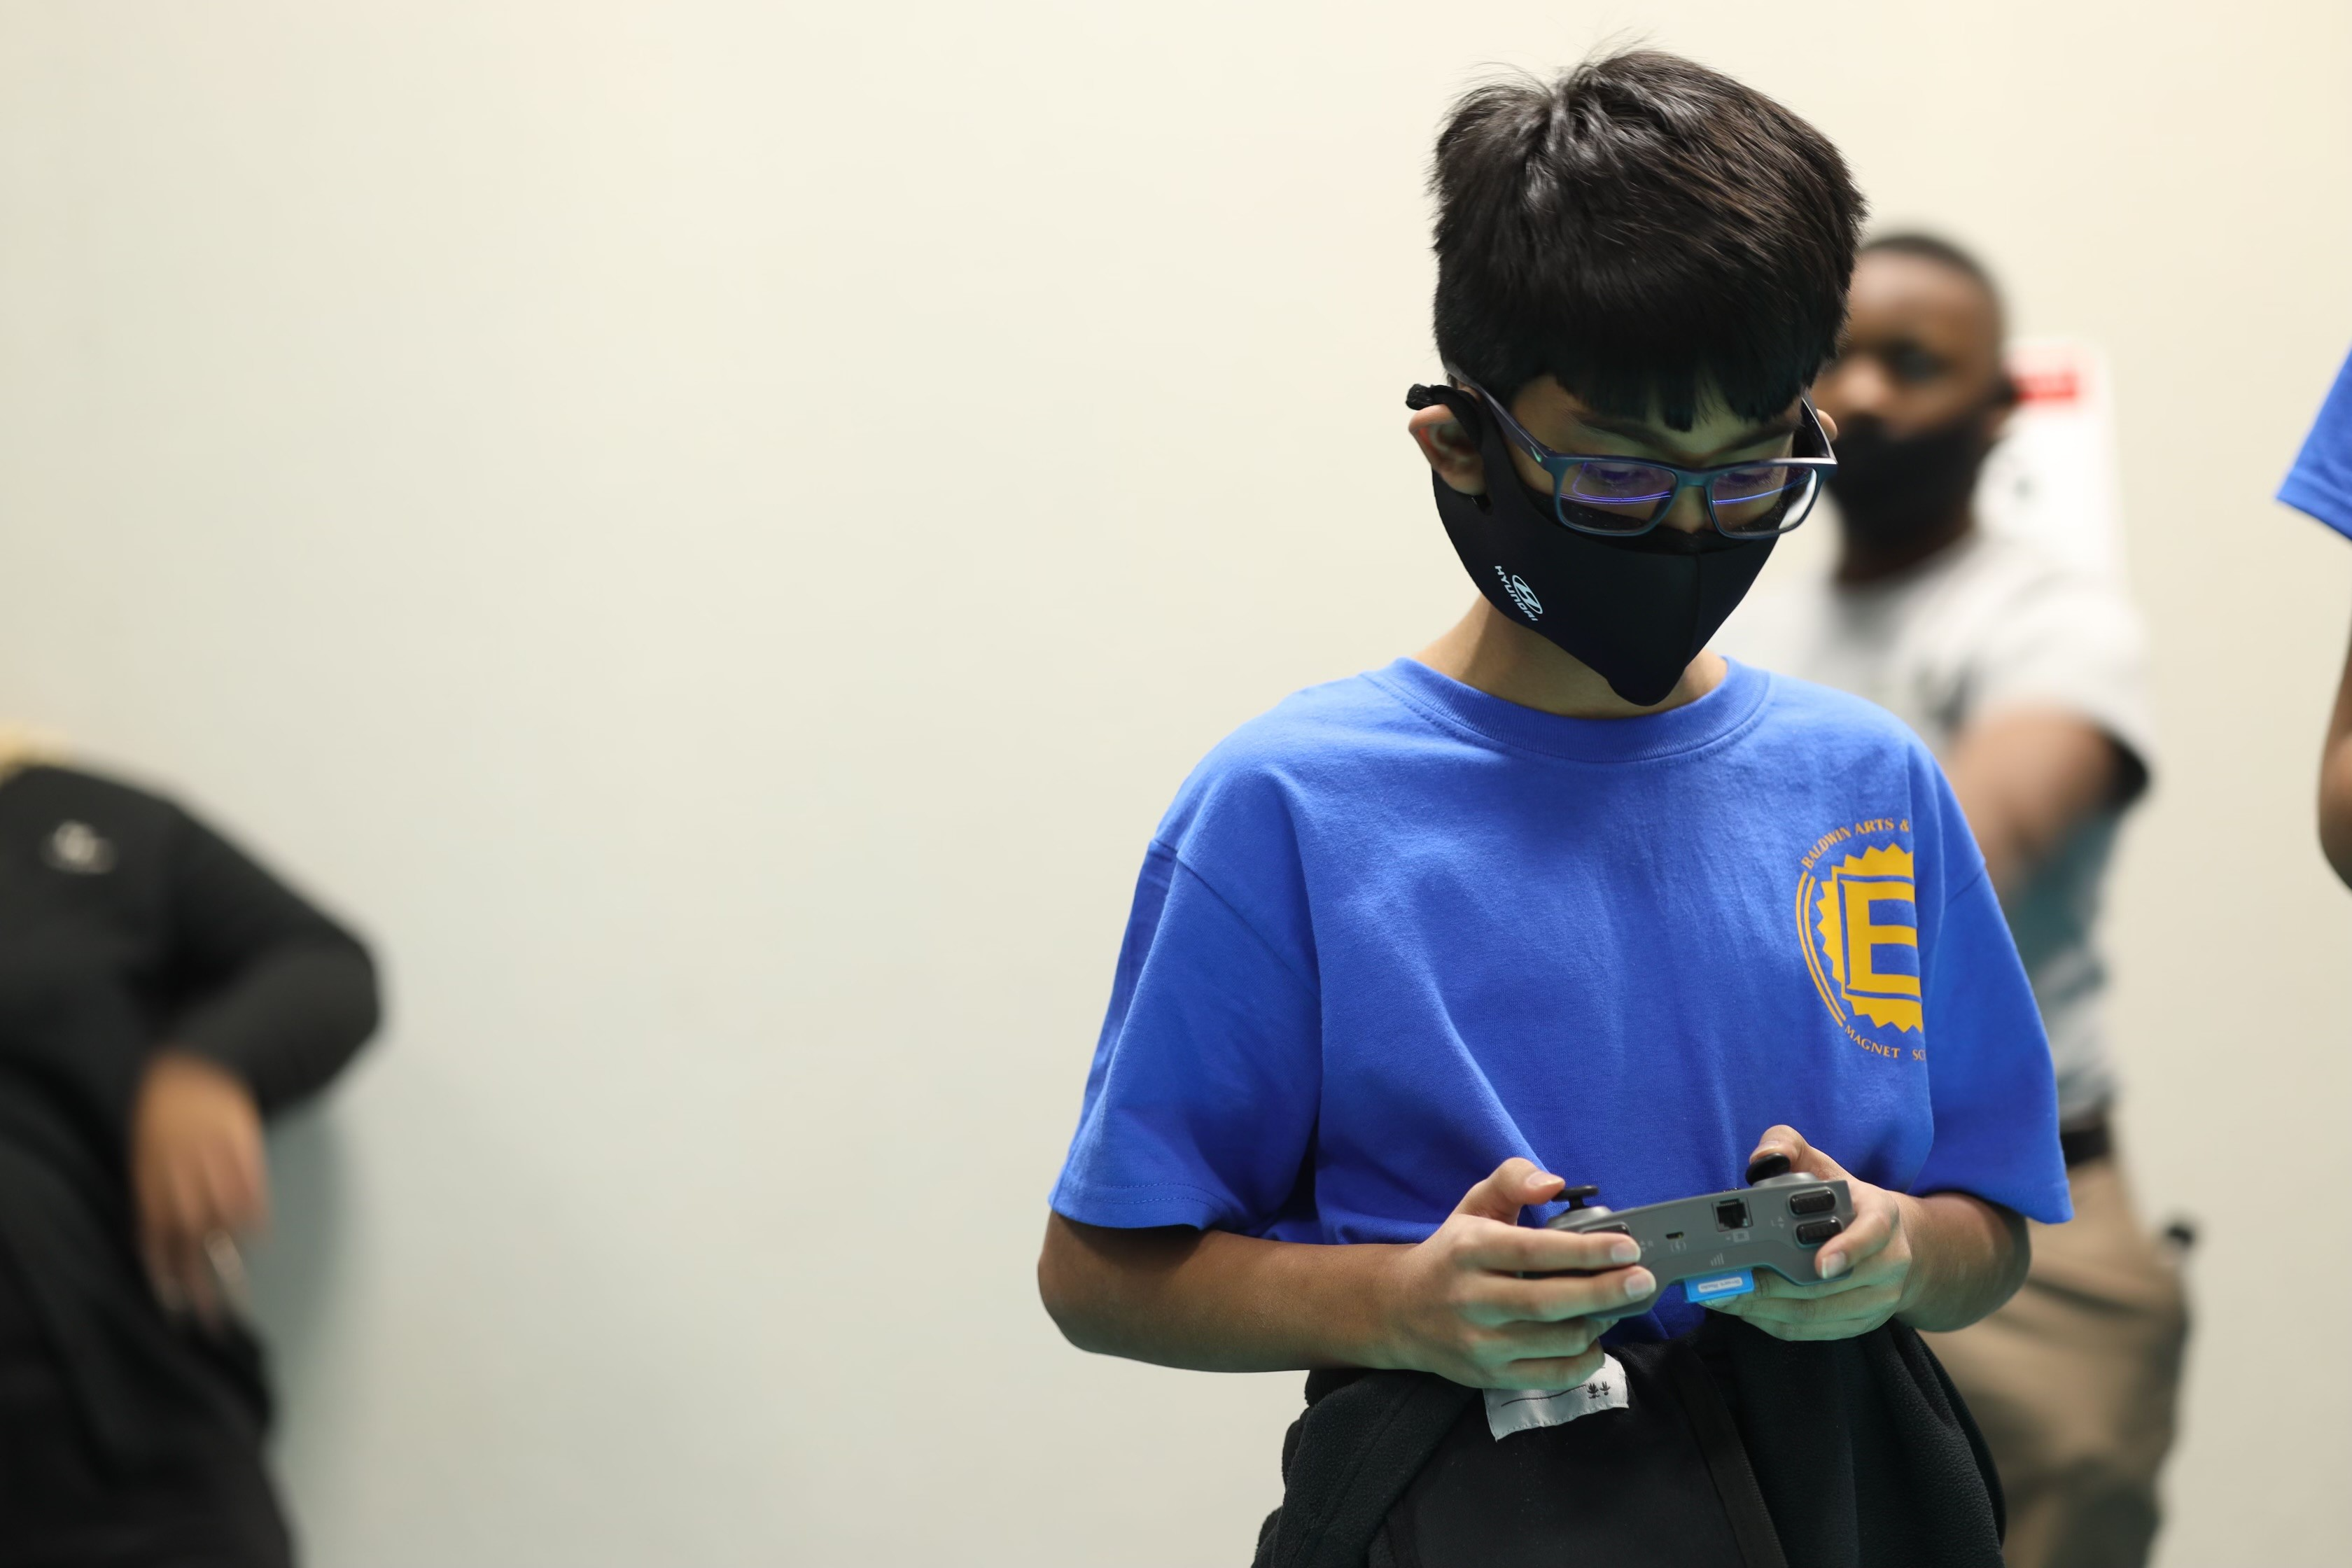 A student holding a controller for a robot competes at the HIRE Robotics Event on Jan. 28.